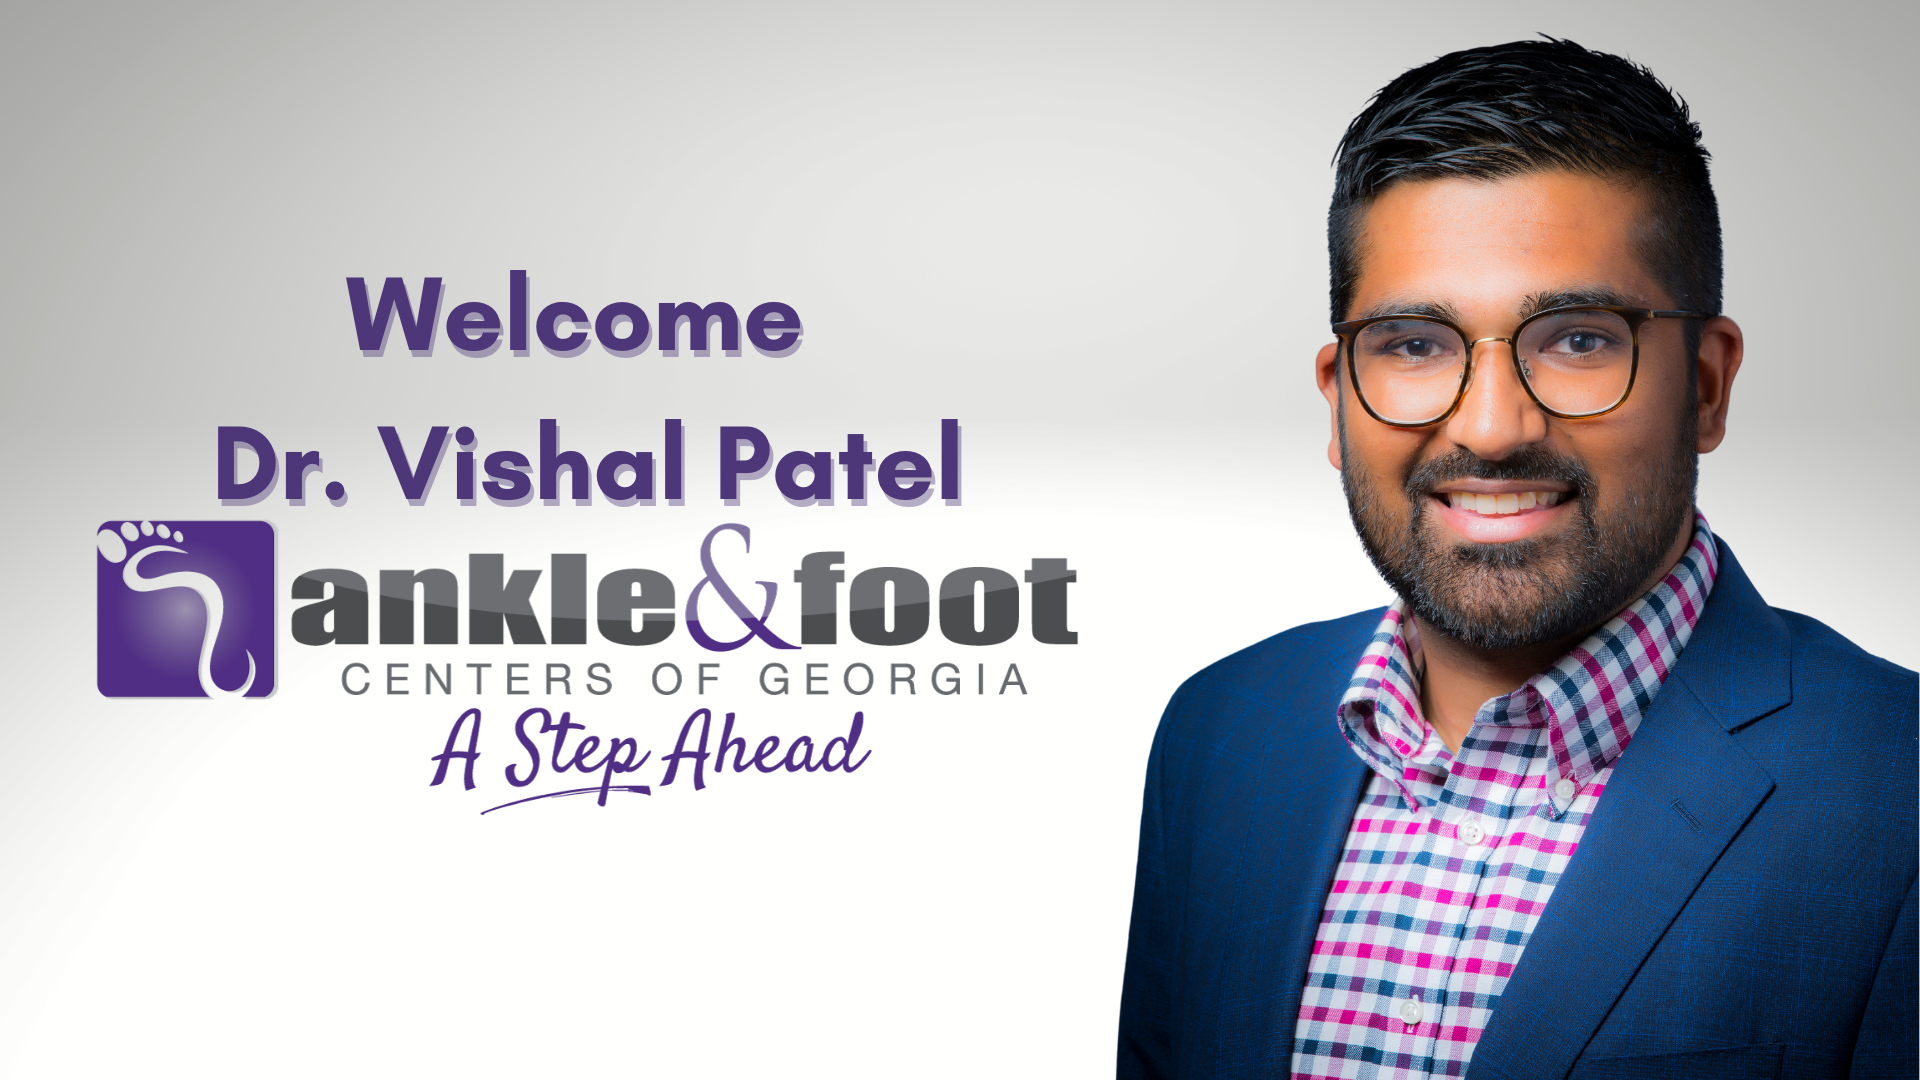 Ankle & Foot Centers of Georgia welcome Dr. Vishal Patel